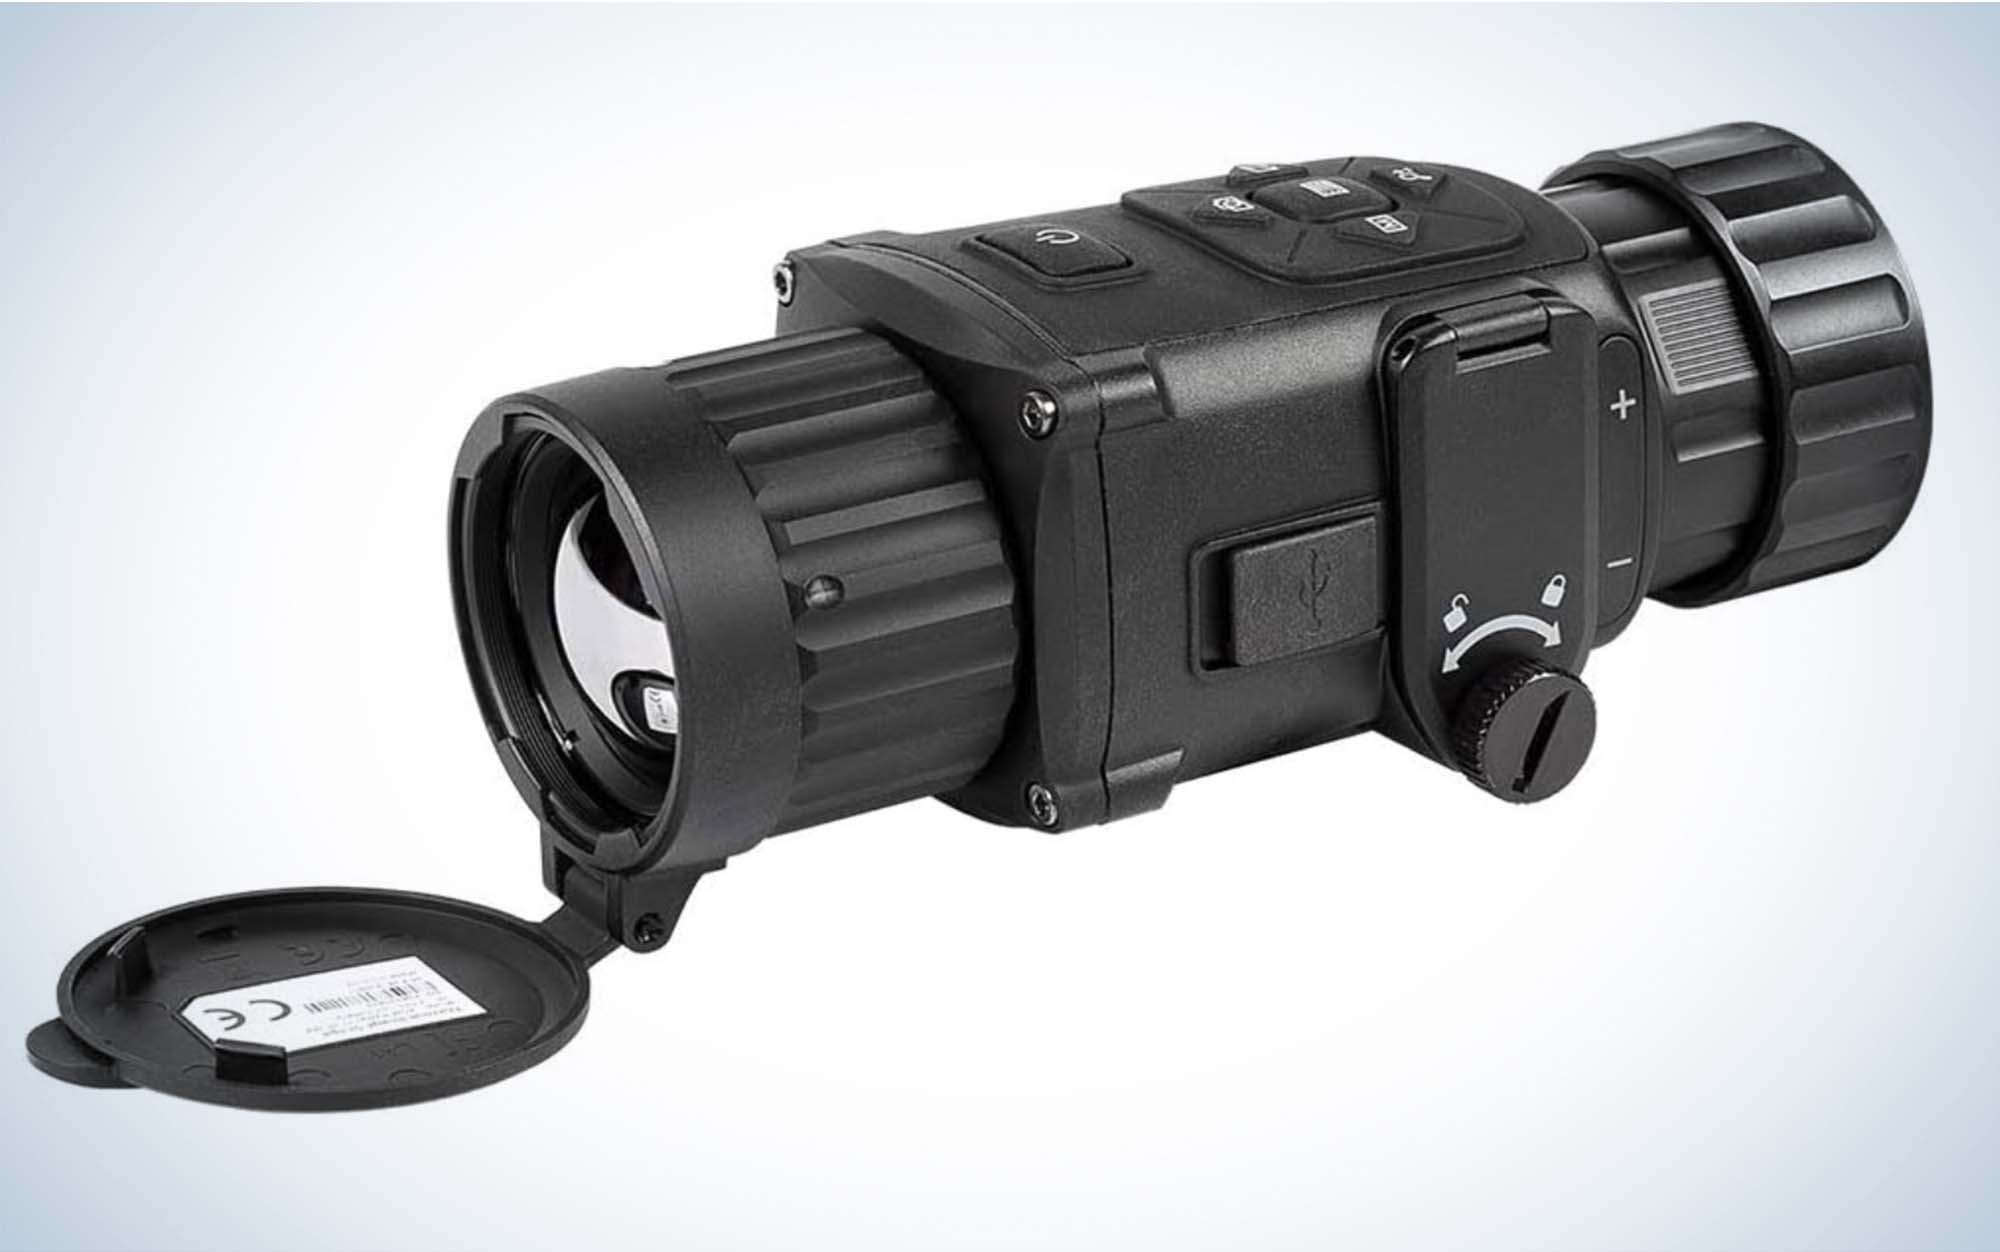 The best value clip on thermal scope the AGM Rattler